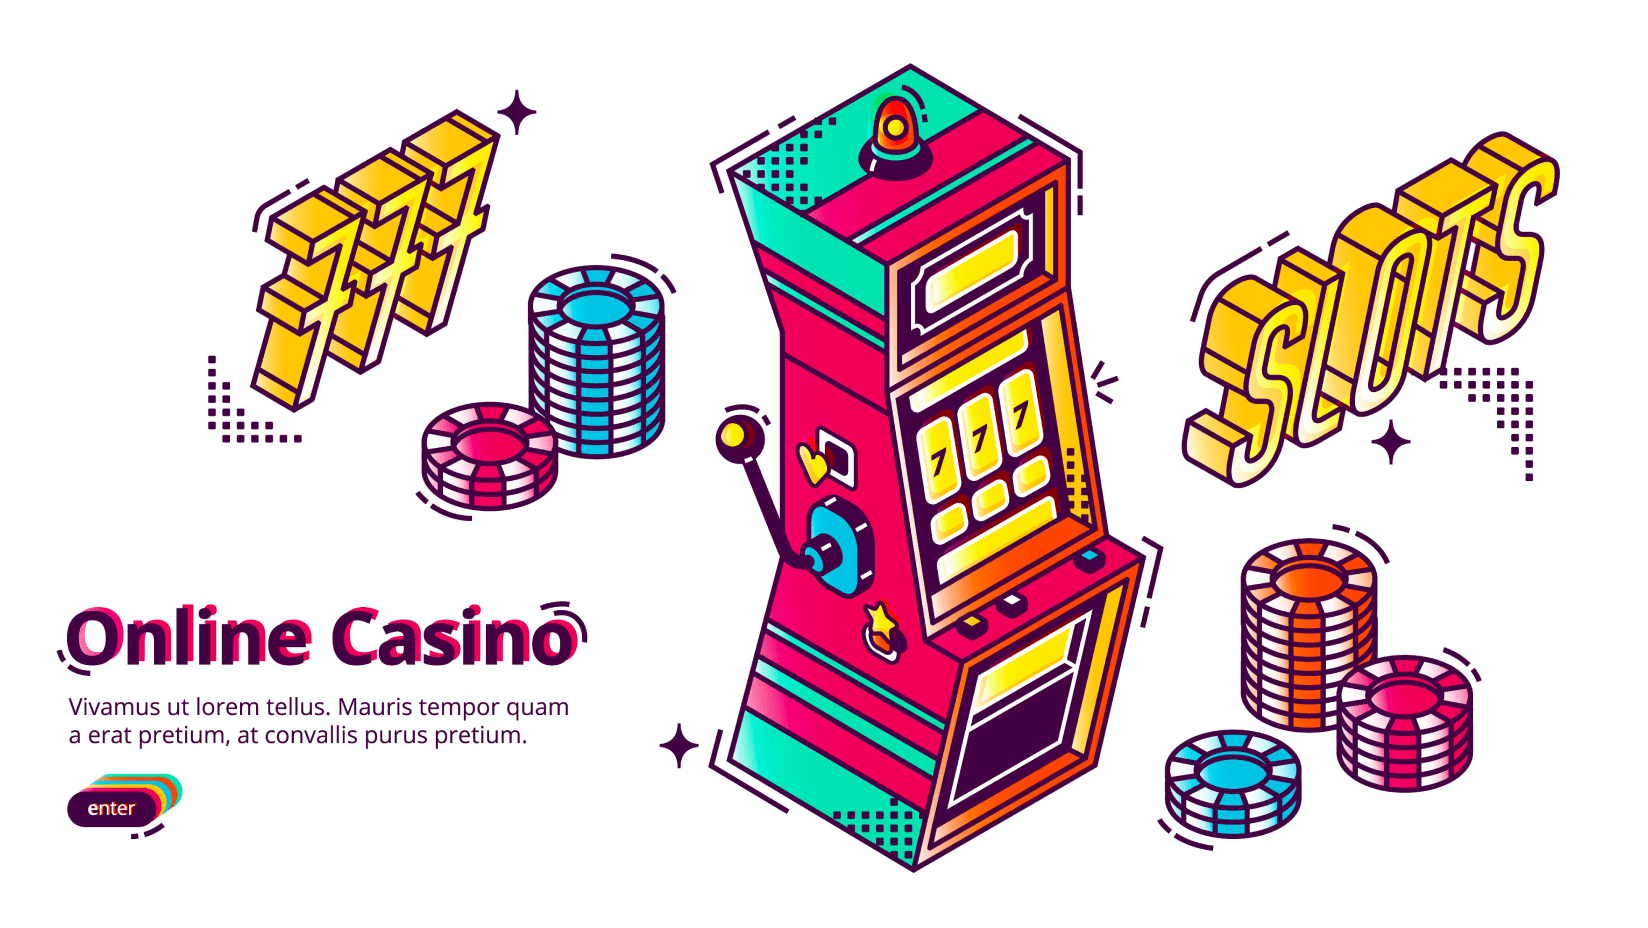 Check out the game diversity in an online casino BTC